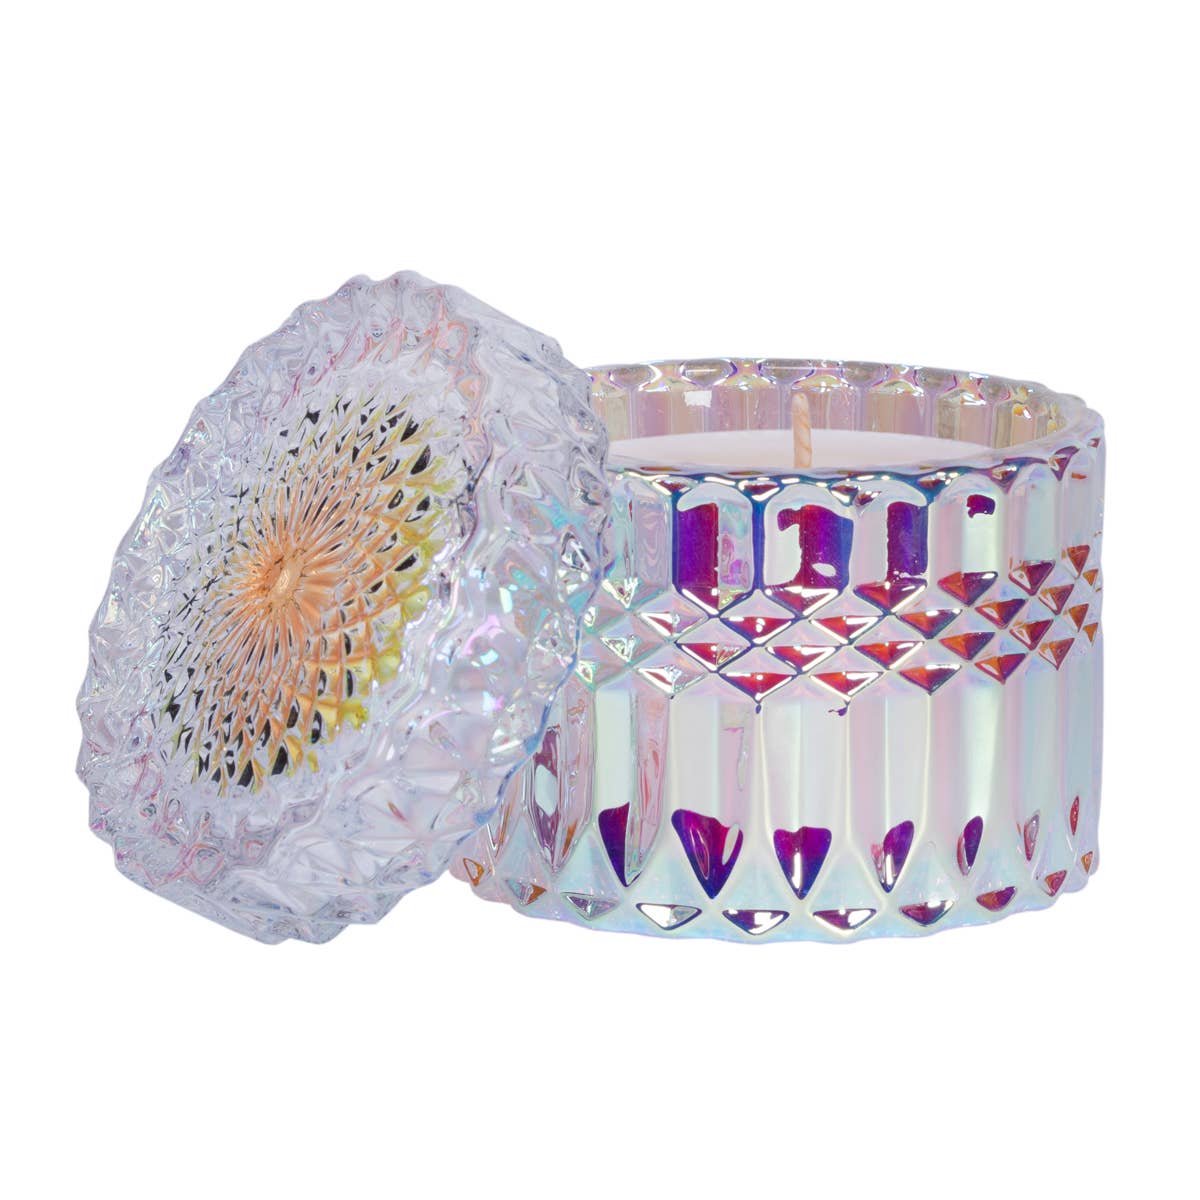 Jeweled Candles